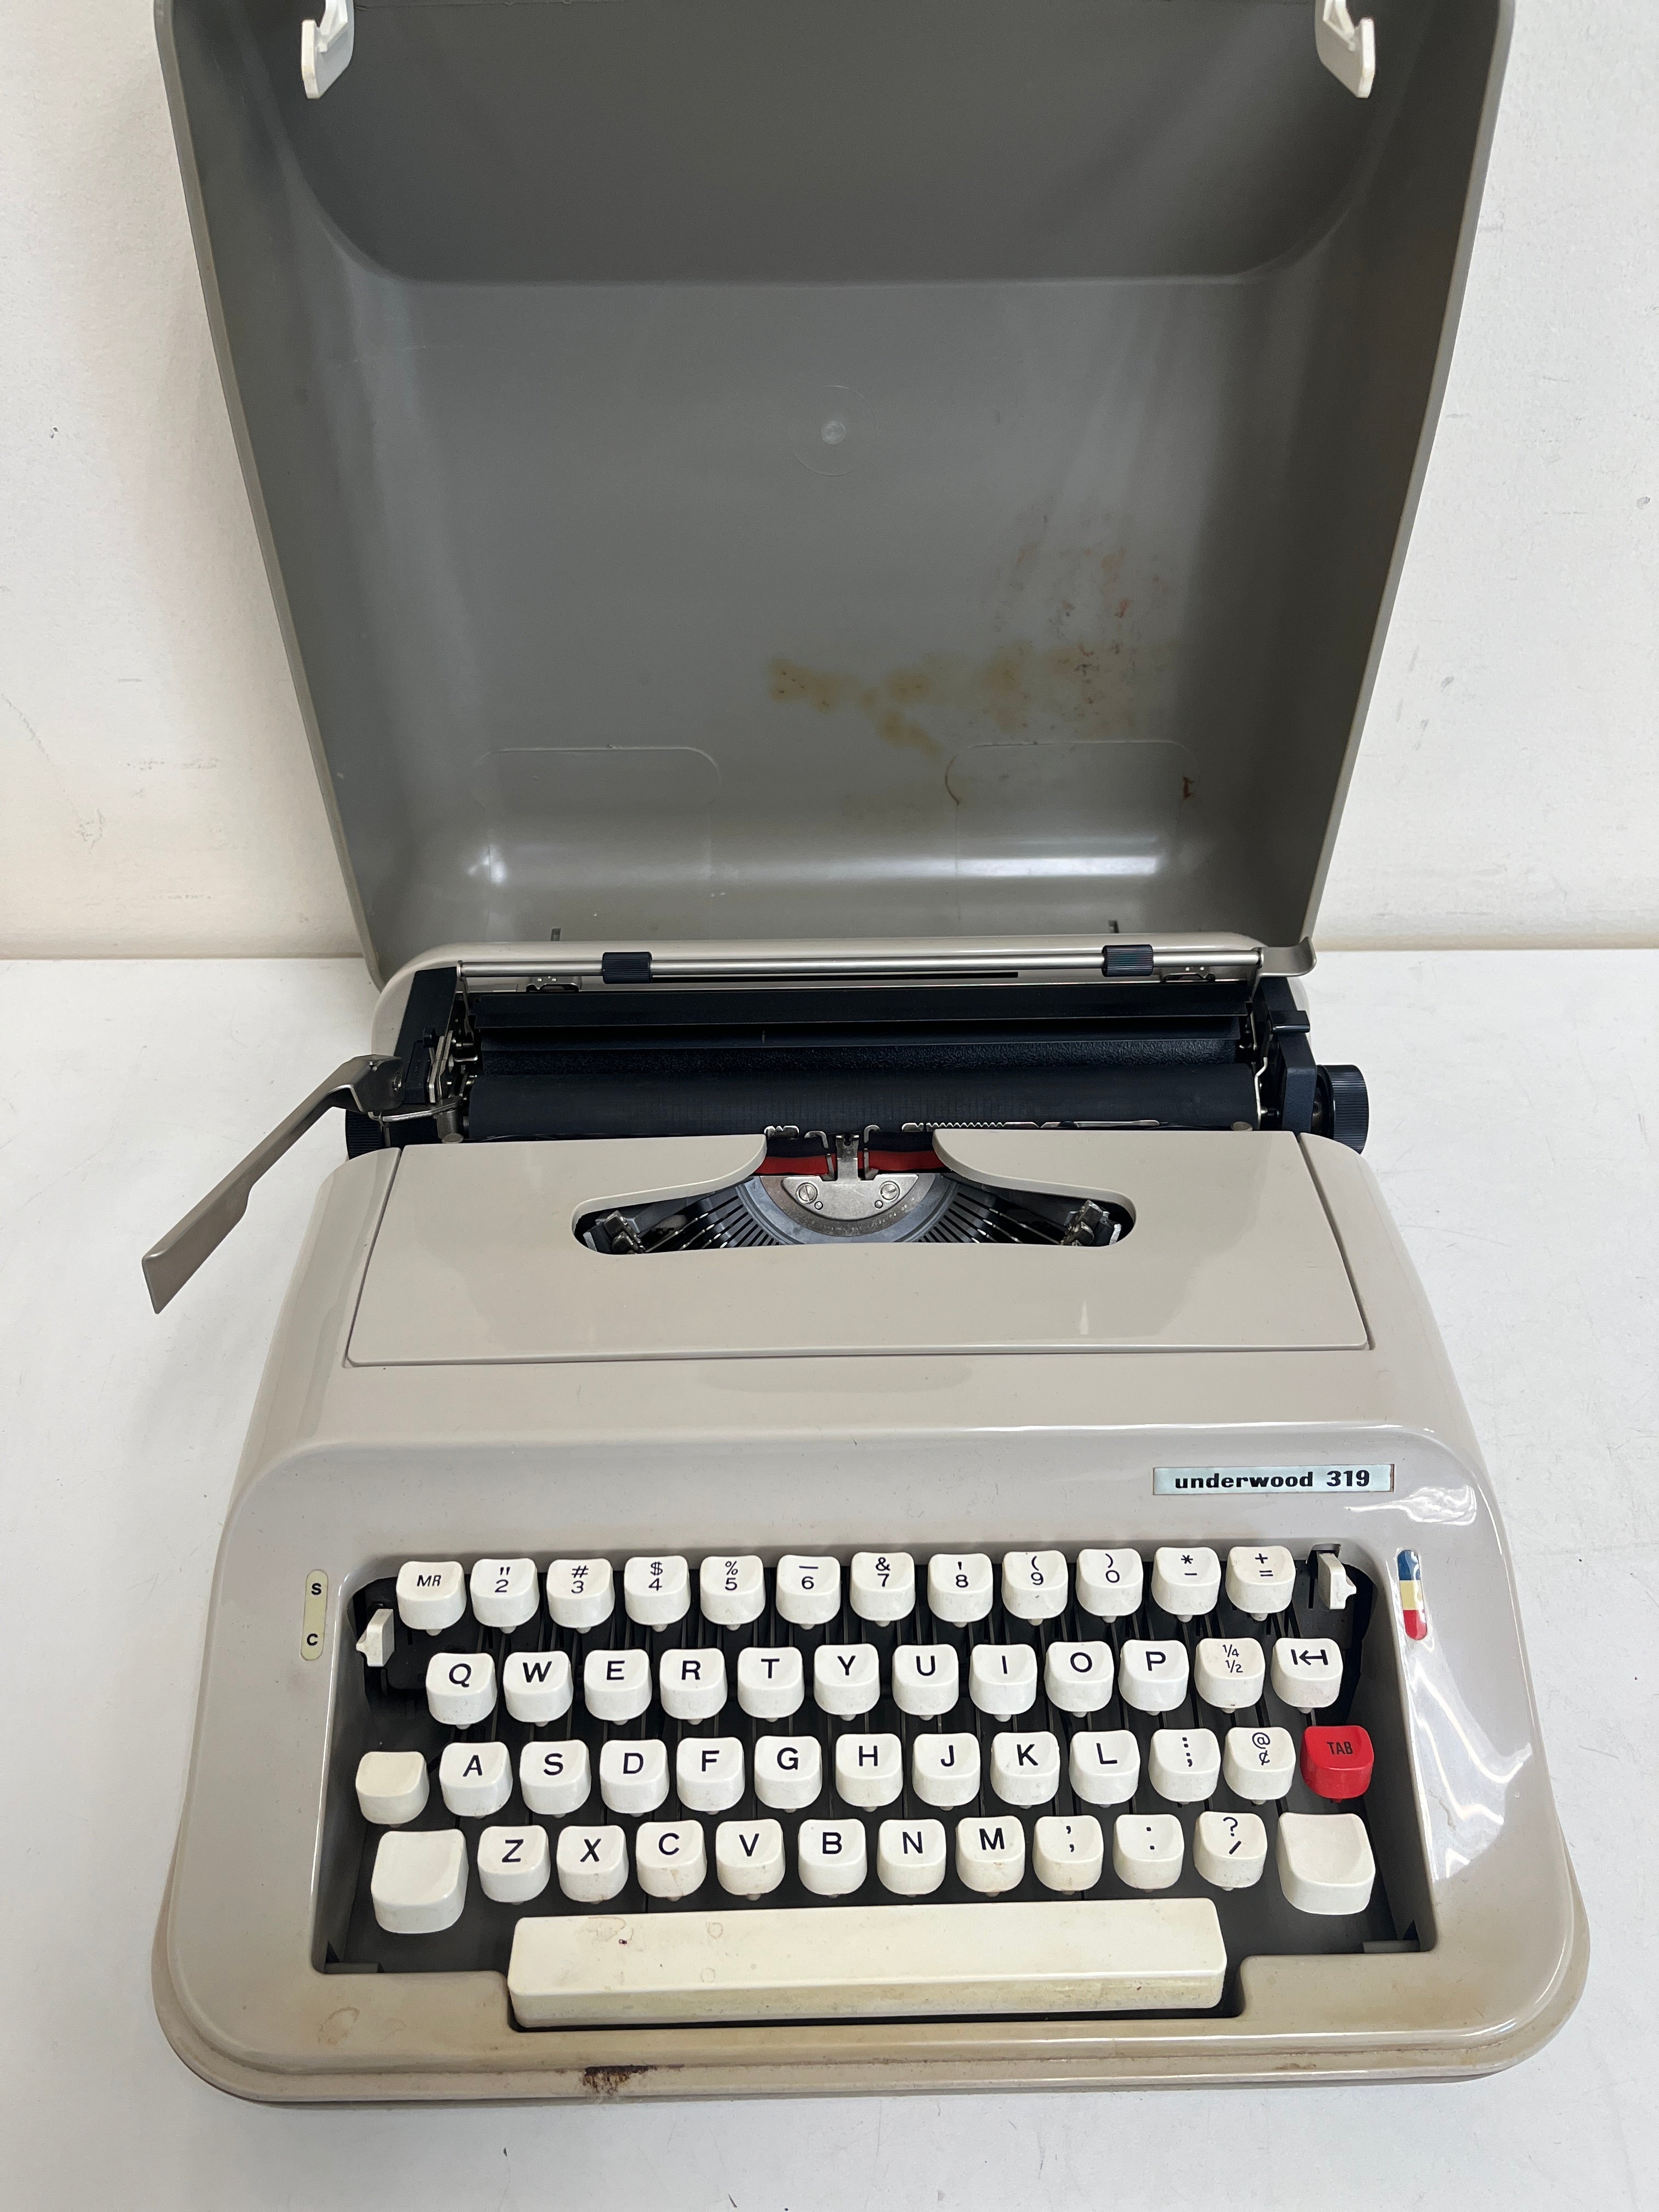 Underwood 319 Grey Portable Typewriter with Case Made in Spain